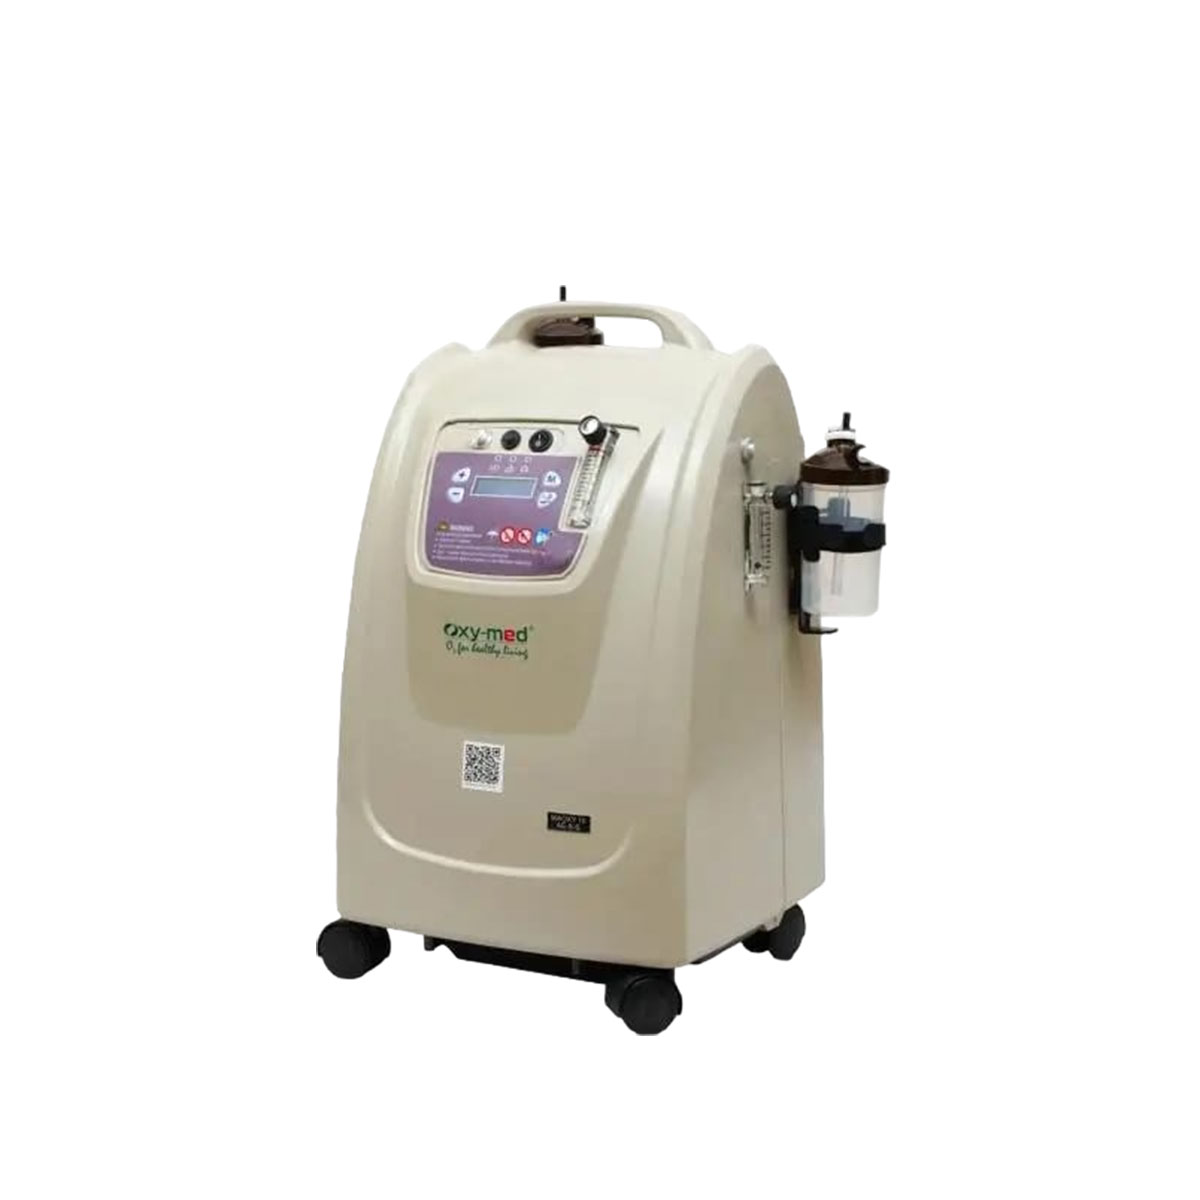 10 Lpm Oxymed Oxygen Concentrator On Sale Suppliers, Service Provider in Dilshad garden